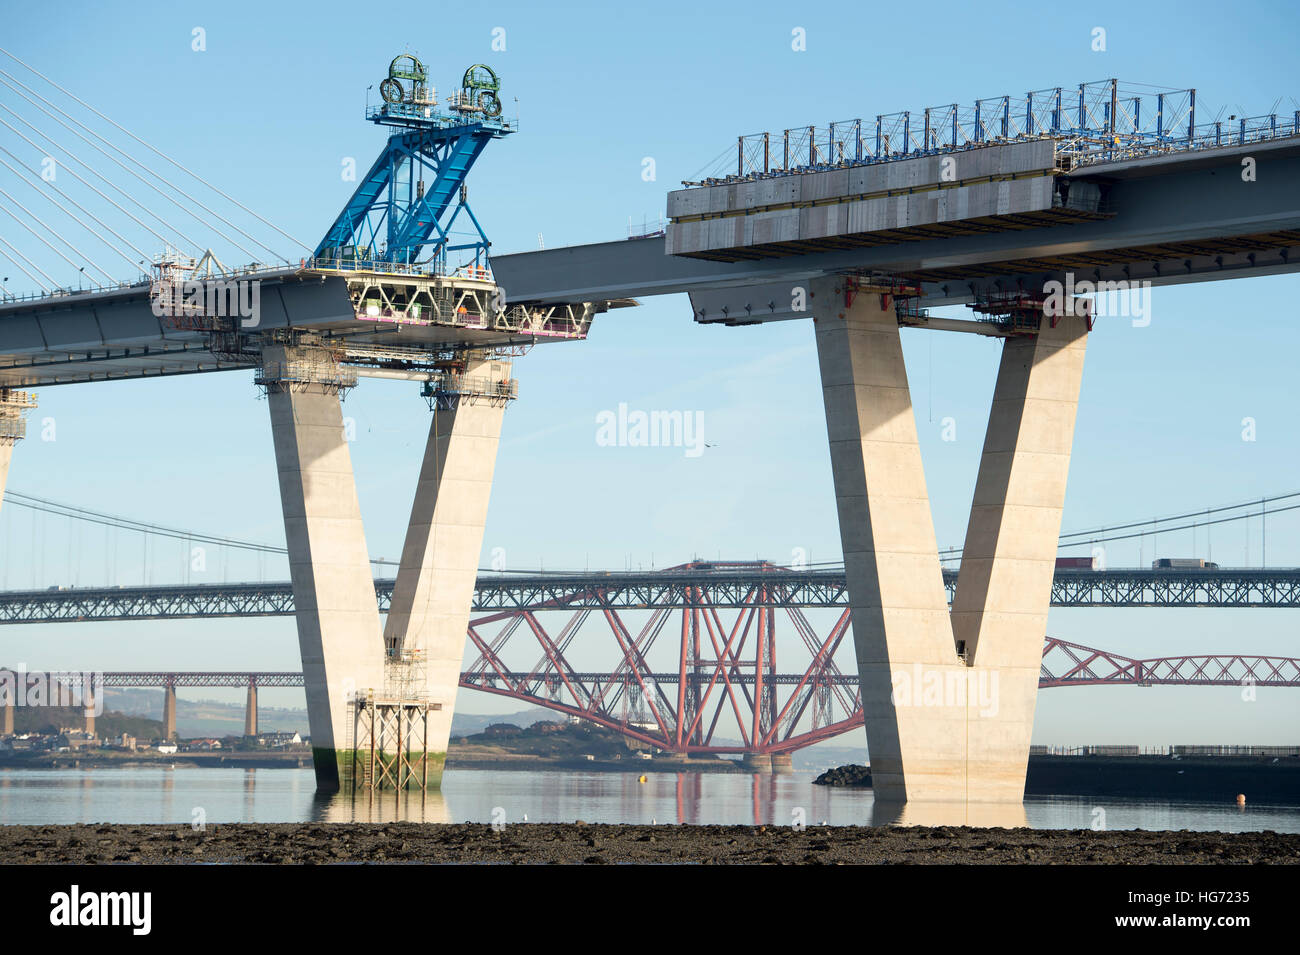 The Queensferry Crossing under construction. The new bridge will carry traffic over the Firth of Forth estuary. Stock Photo